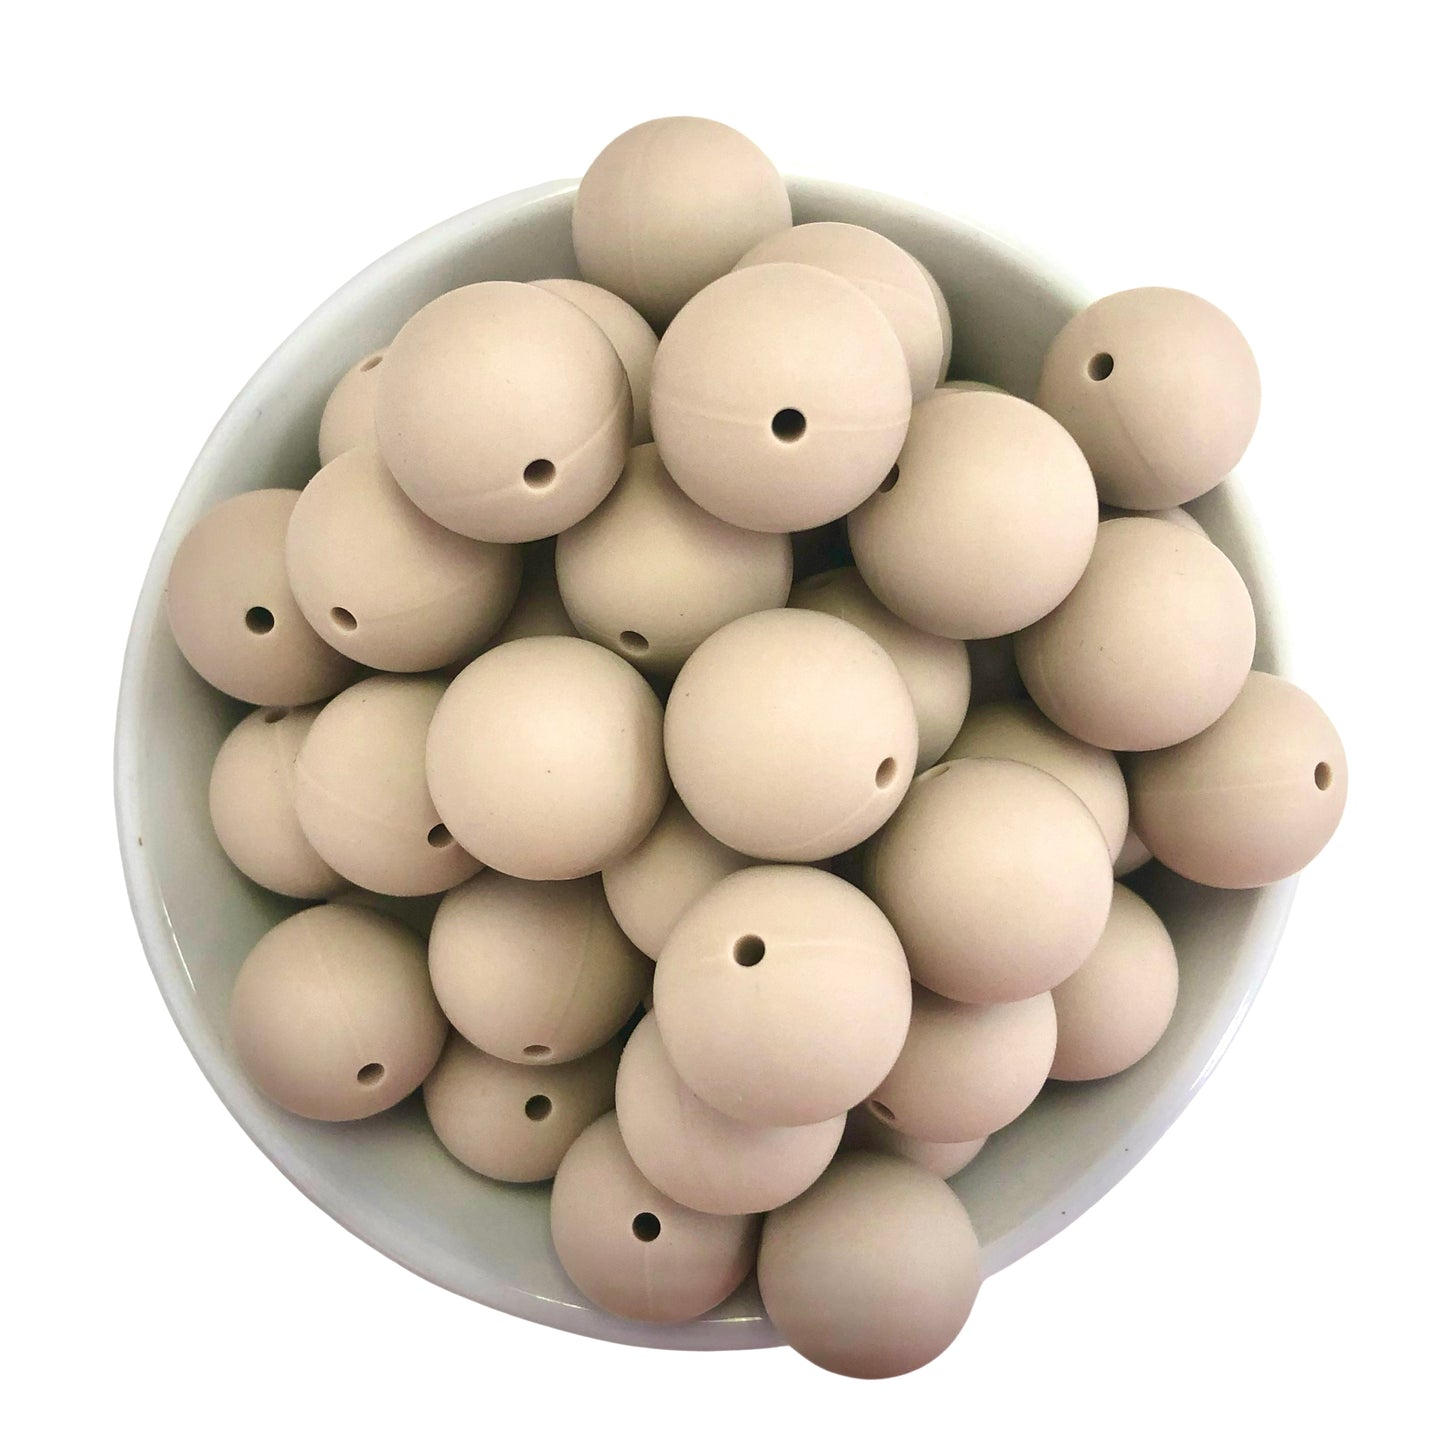 Sandy Dunes 15mm Silicone Beads - 10 pk.